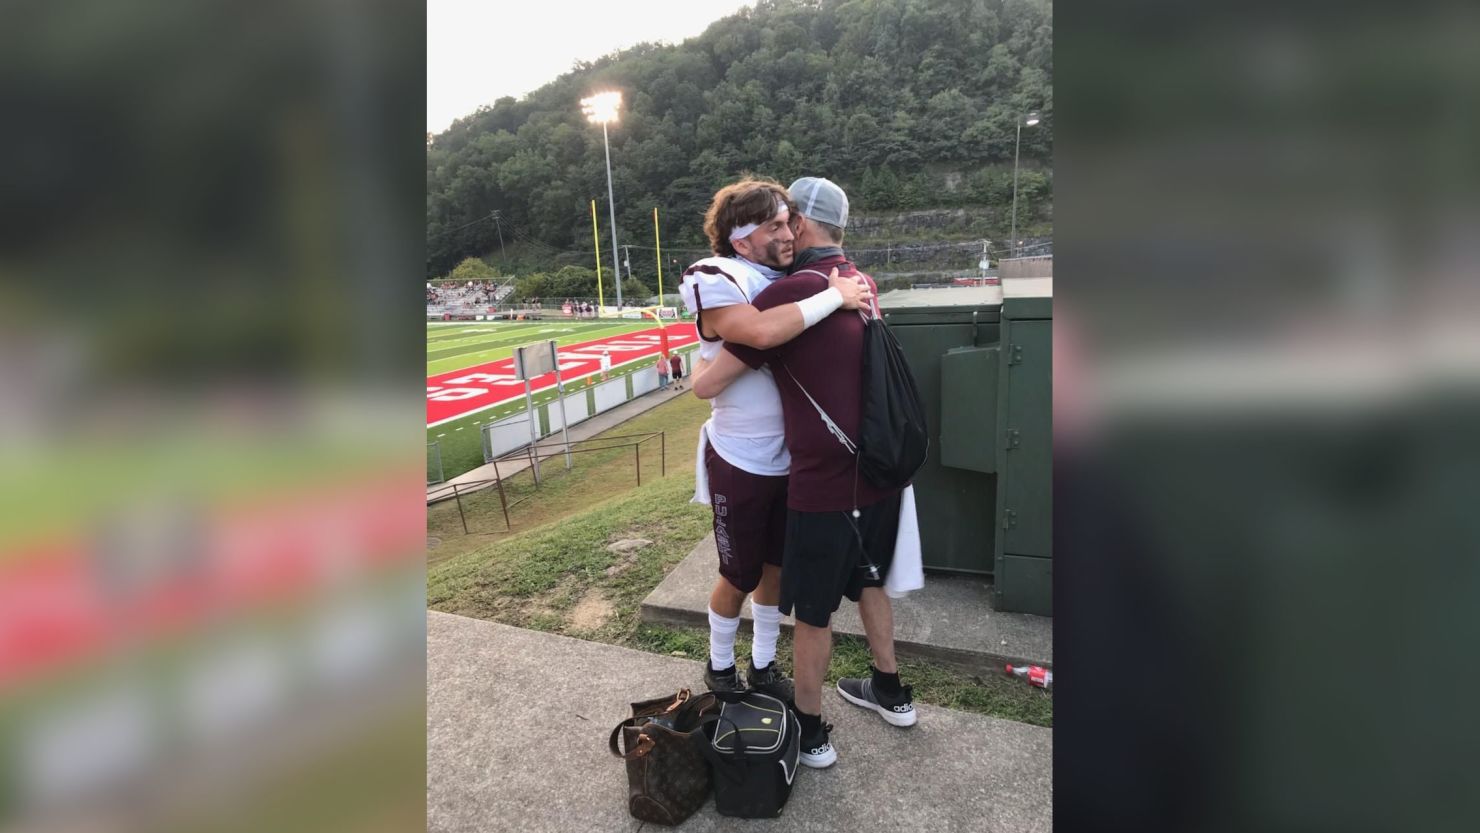 Scott Sullivan, terminally ill with cancer, hugs his son Cade before the opening game of high school football season.